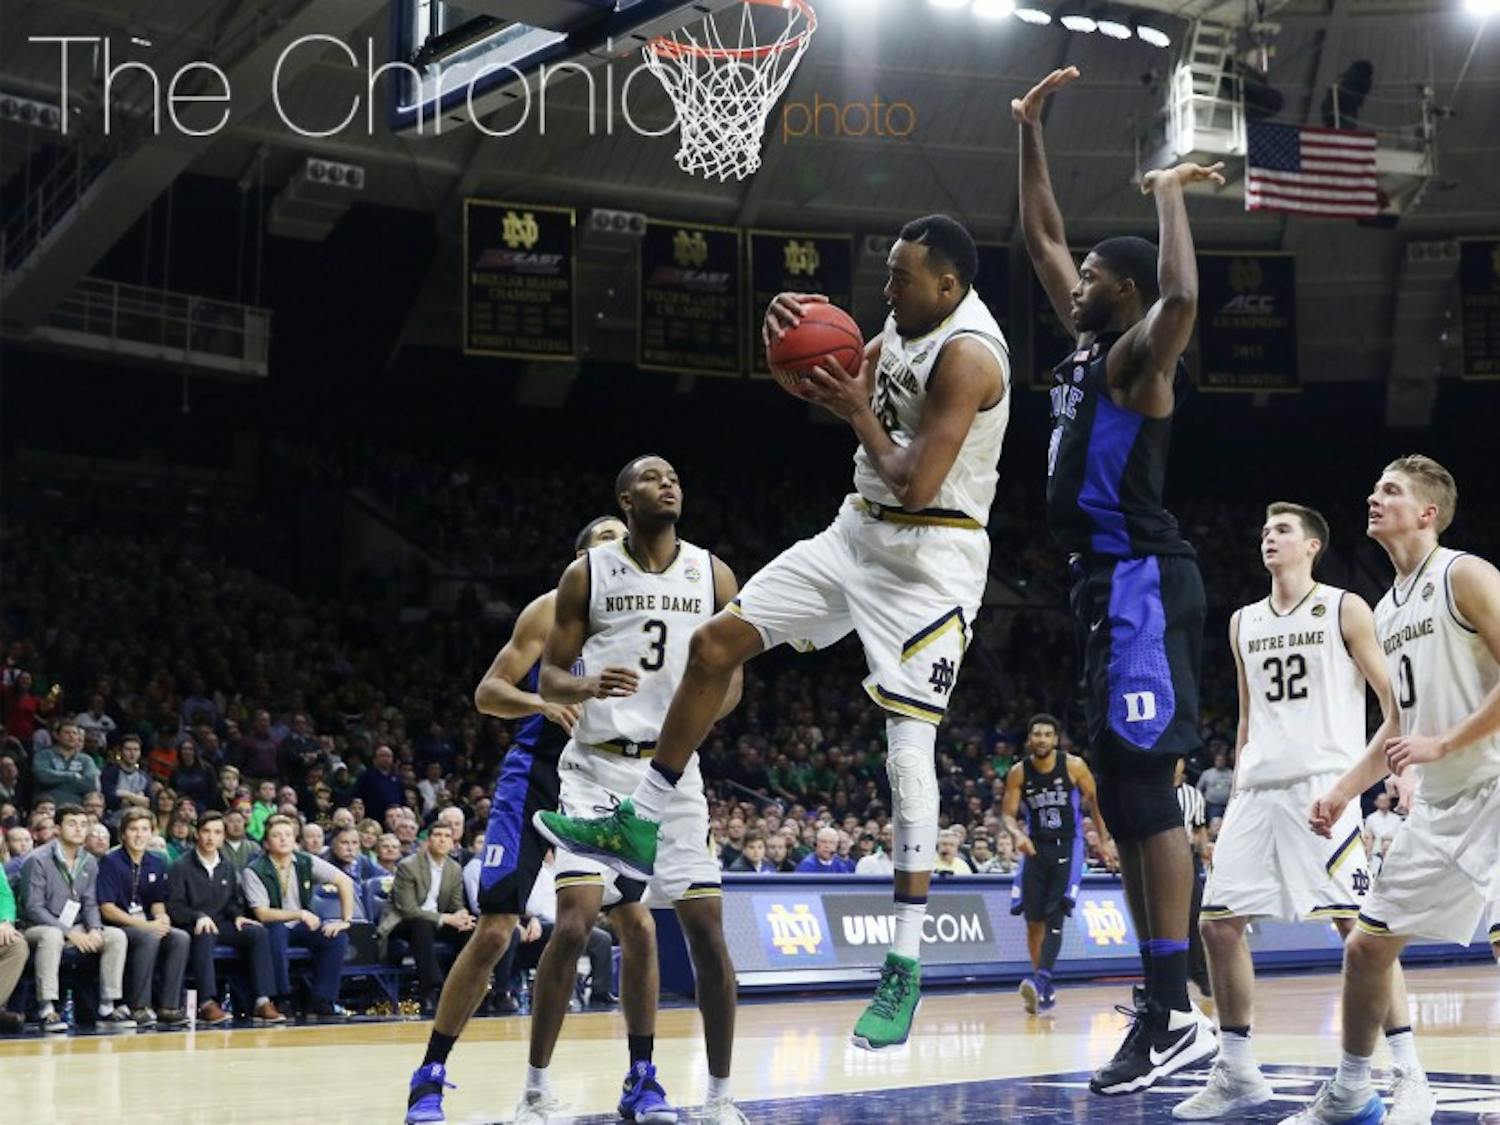 Notre Dame forward Bonzie Colson earned first-team All-ACC honors after keeping his team in the upper echelon of conference powers by gobbling up rebounds and using an array of post moves in the paint.&nbsp;